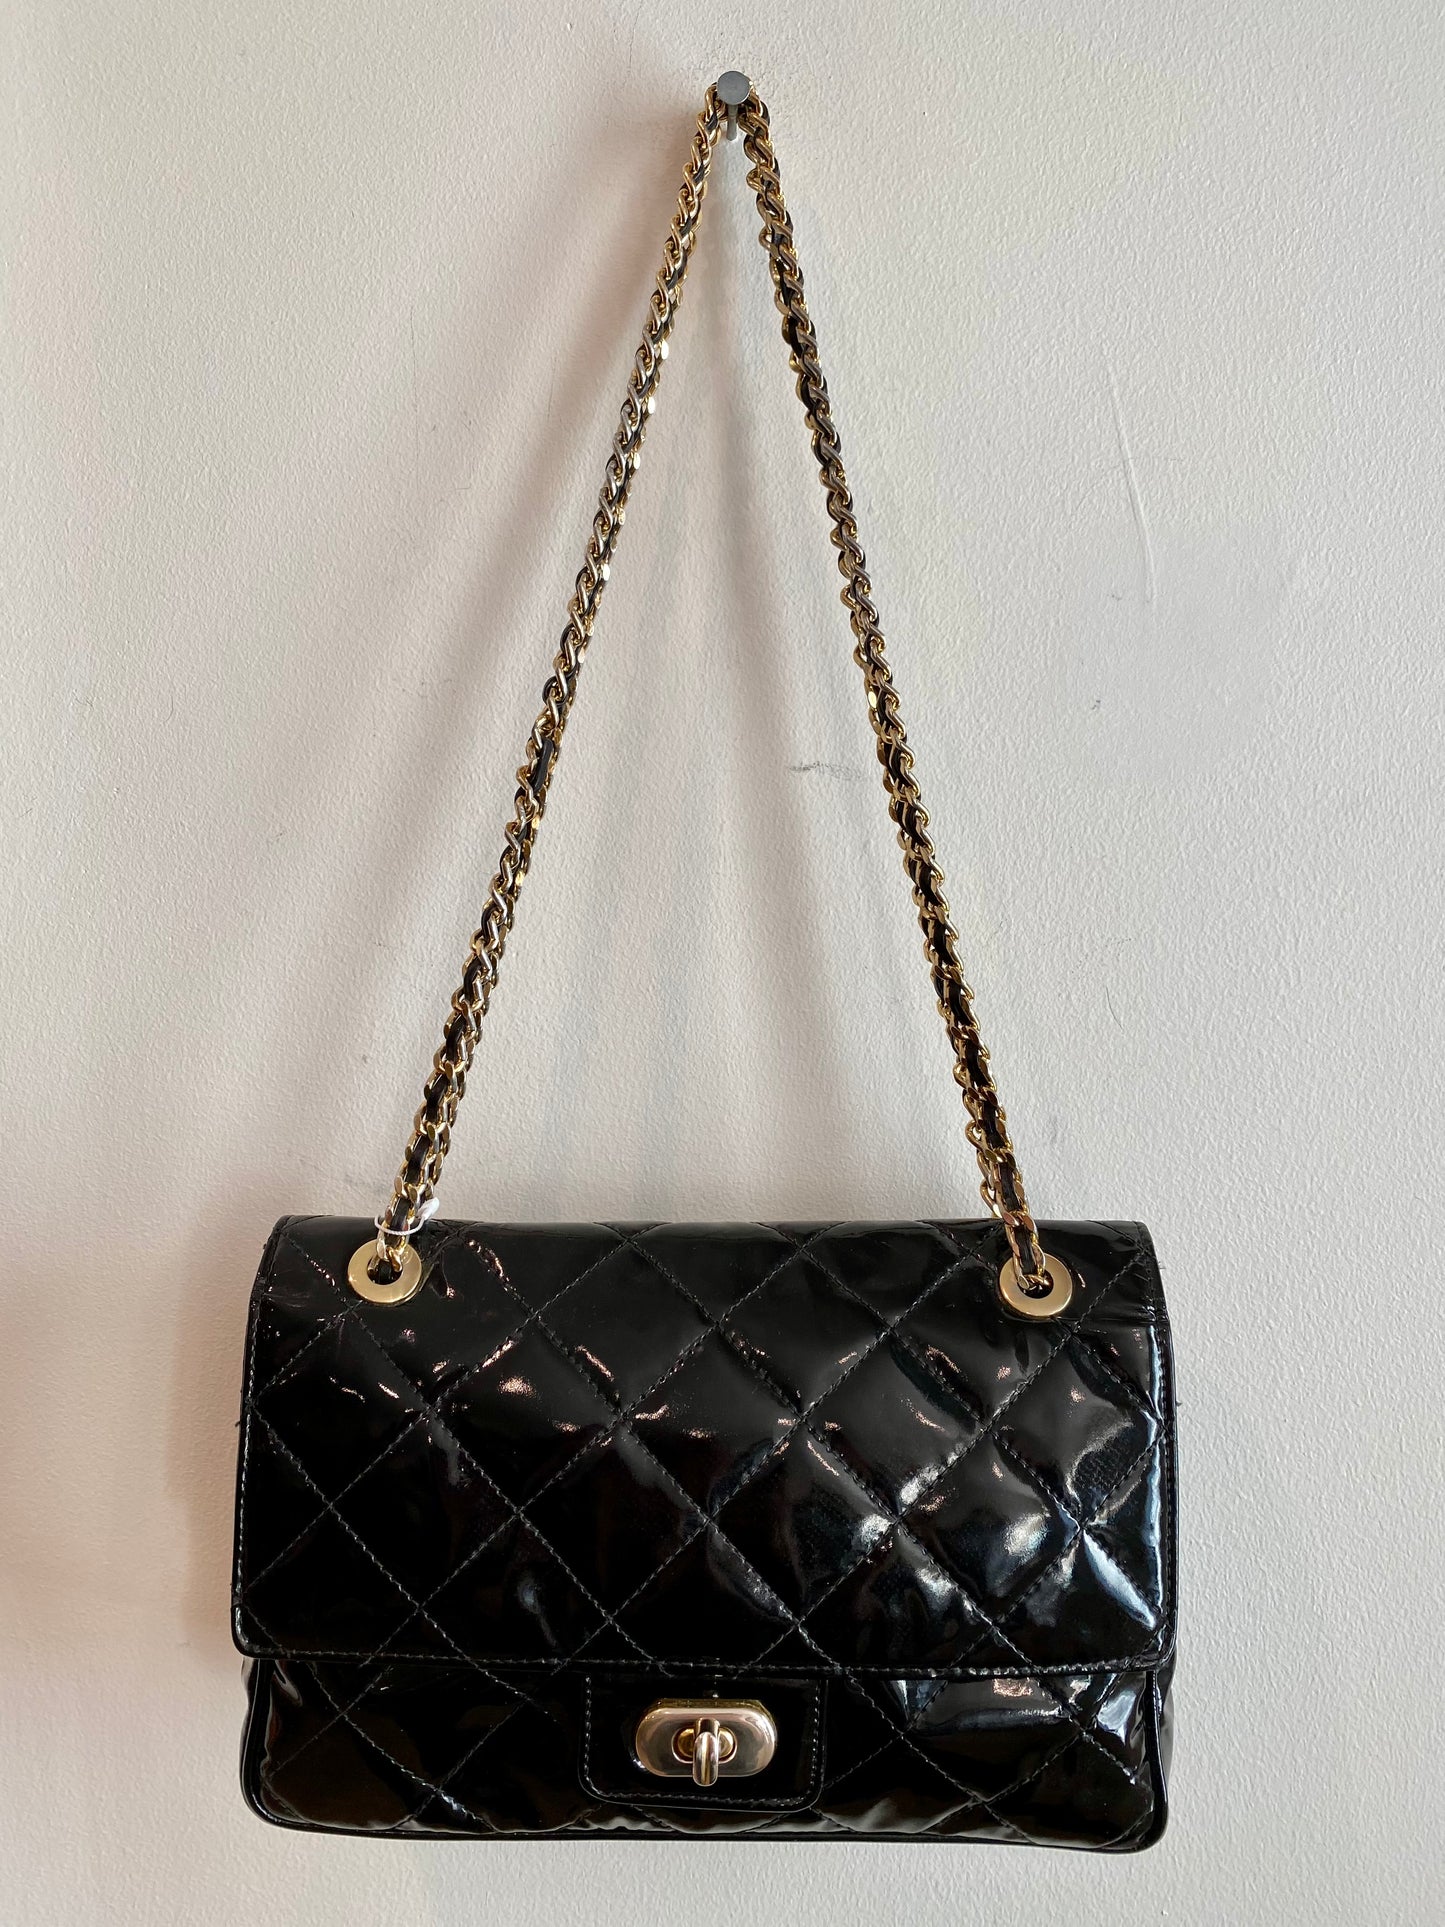 Black Patent Leather Quilted Bag